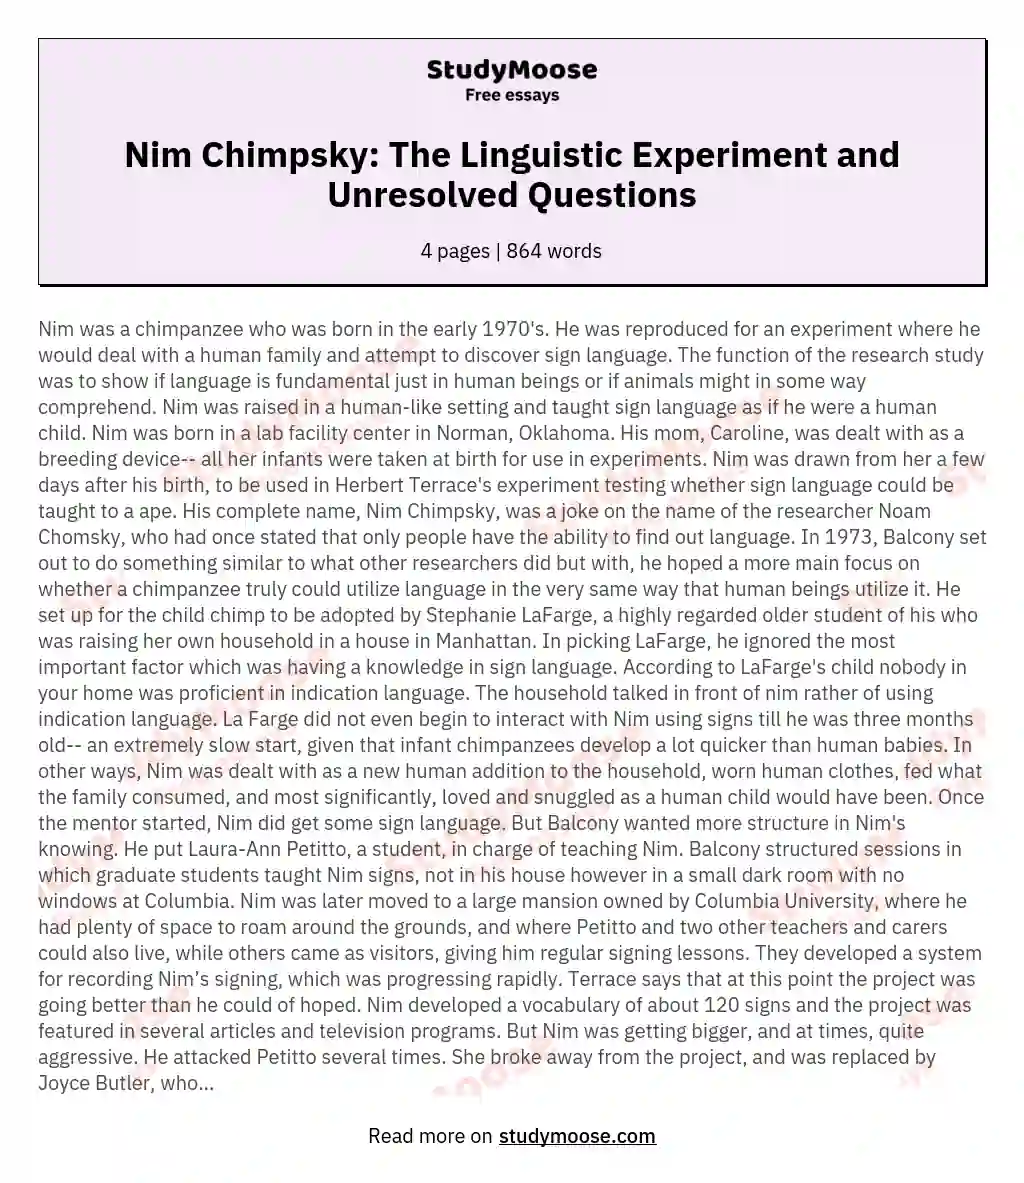 Nim Chimpsky: The Linguistic Experiment and Unresolved Questions essay